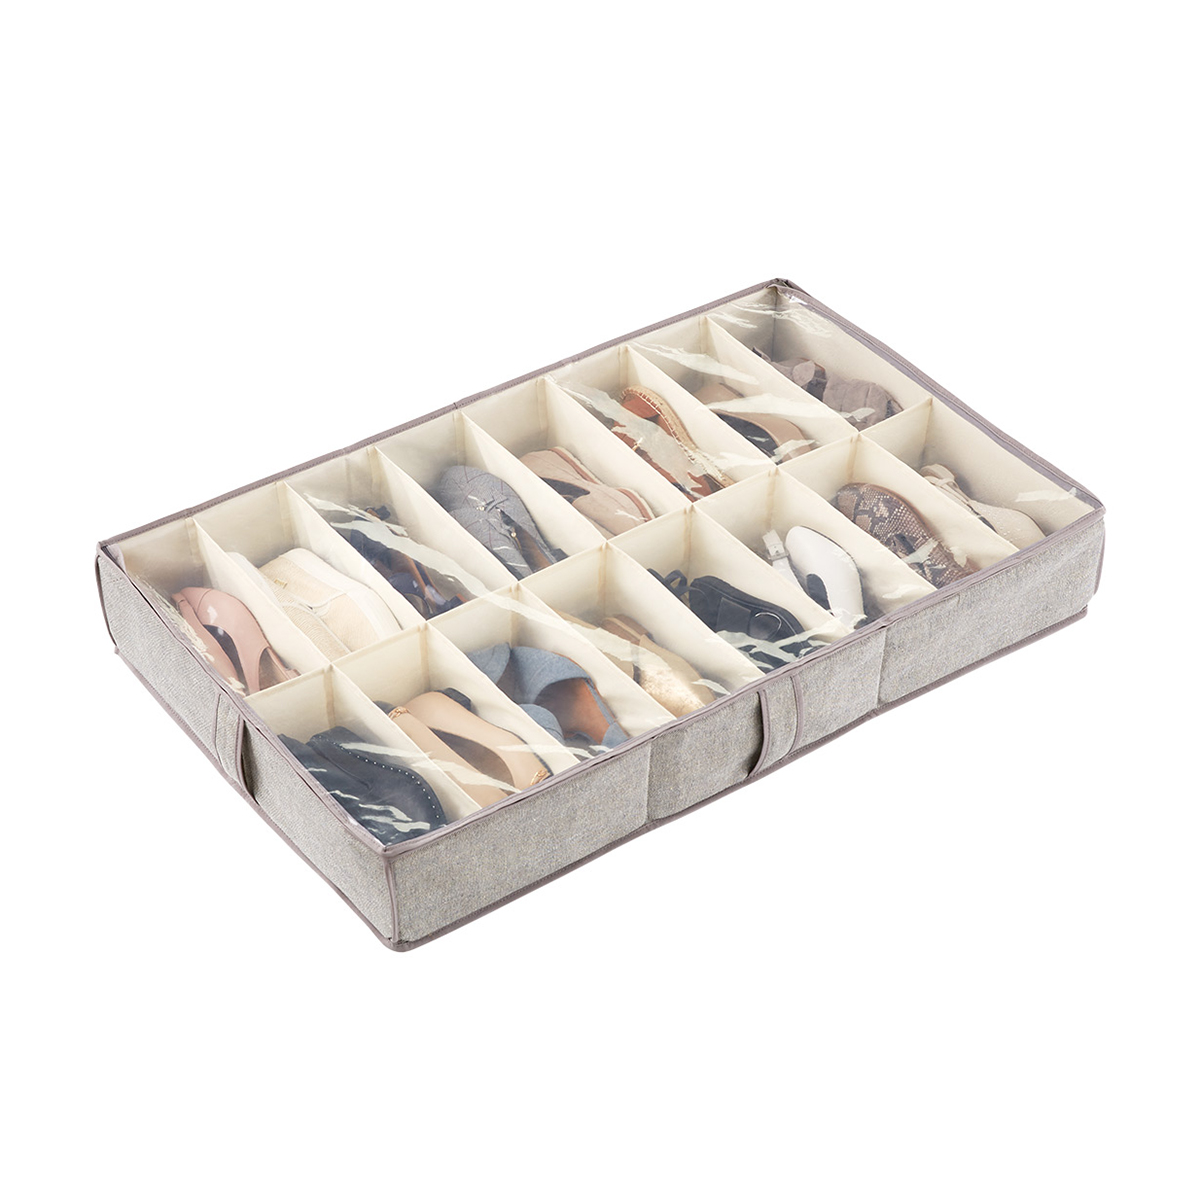 https://www.containerstore.com/catalogimages/364515/10077408-PVL-underbed-shoe-organizer.jpg